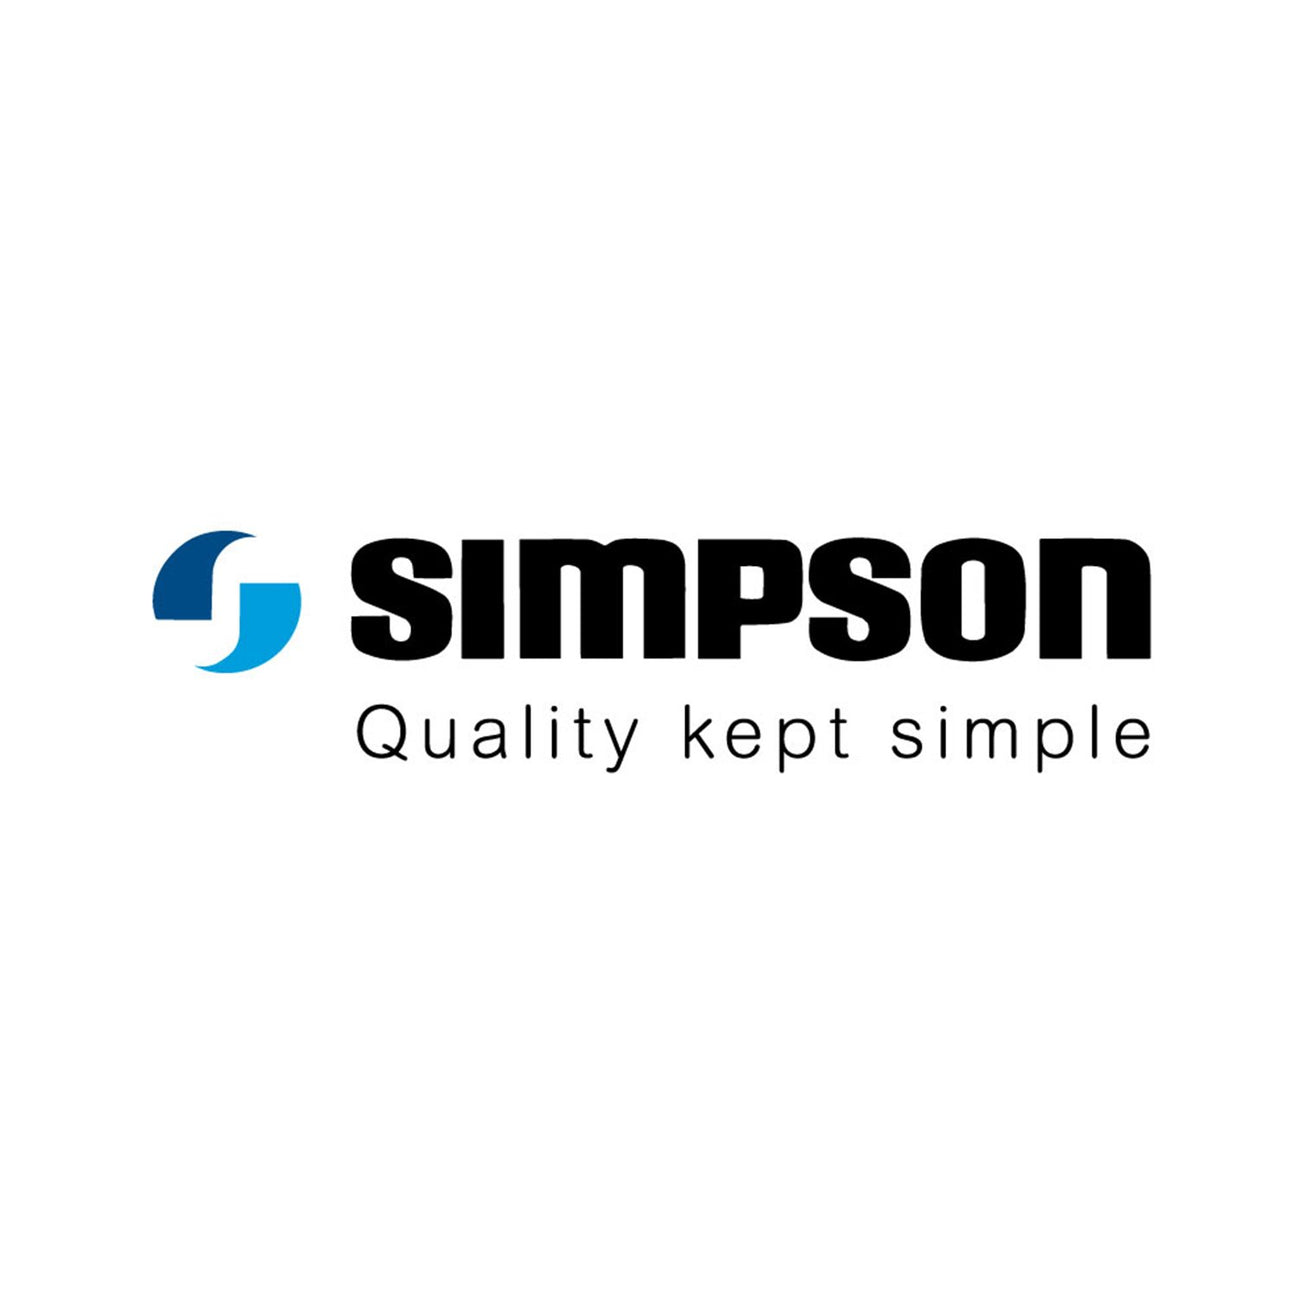 Simpson Cooktop & Oven Parts - My Oven Spares